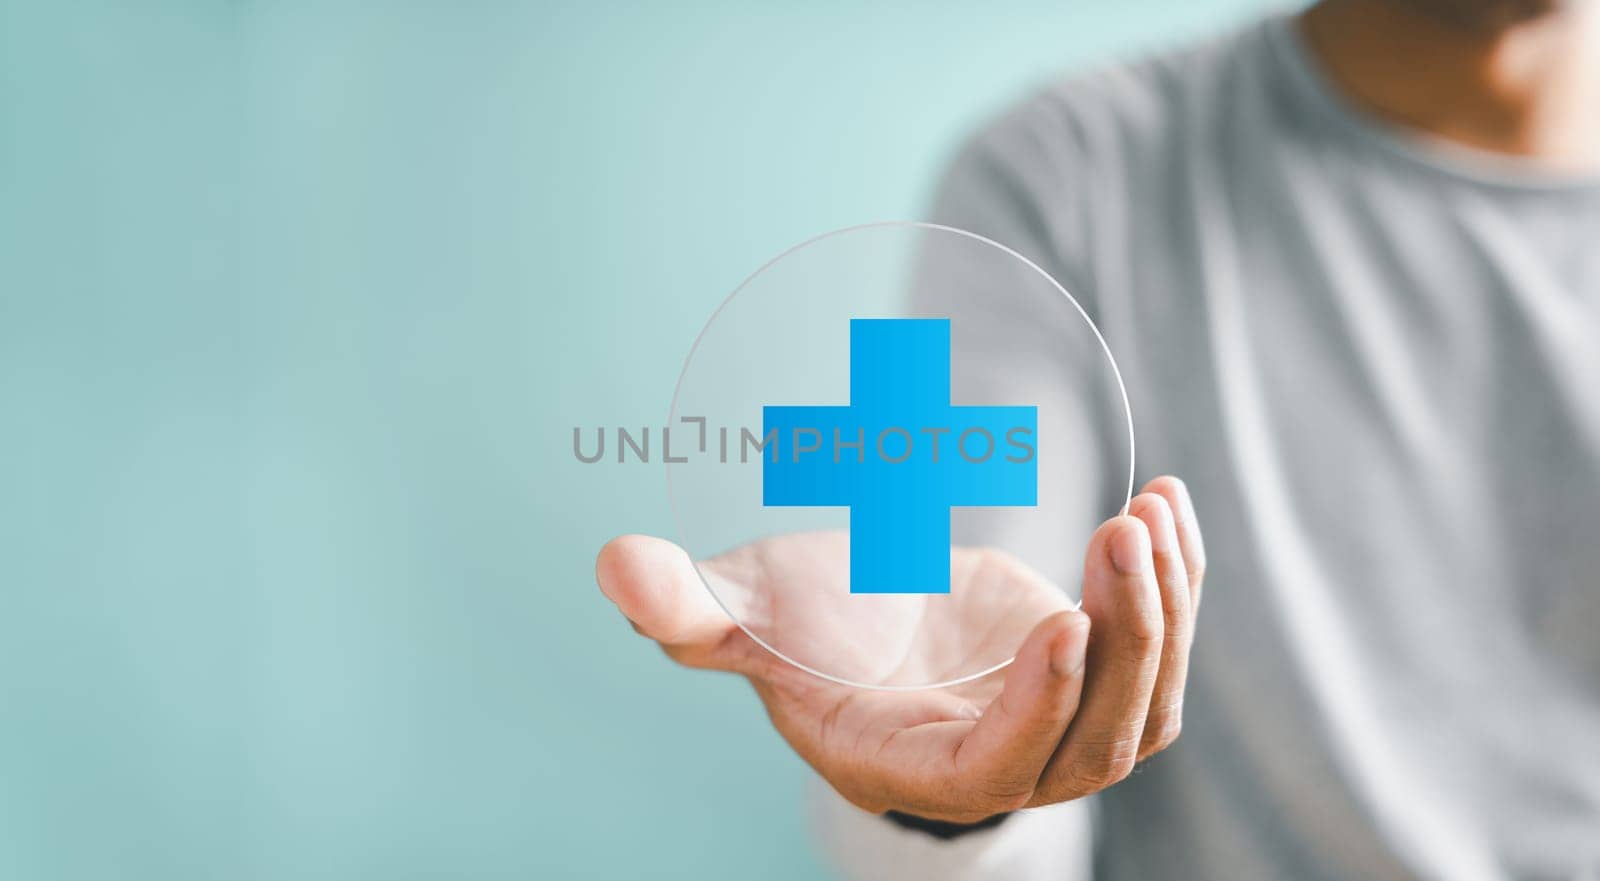 Hand grasps plus icon for healthcare, symbolizing benefits. Health insurance health concept, access to welfare health with empty area. Conveys value addition in medical services.